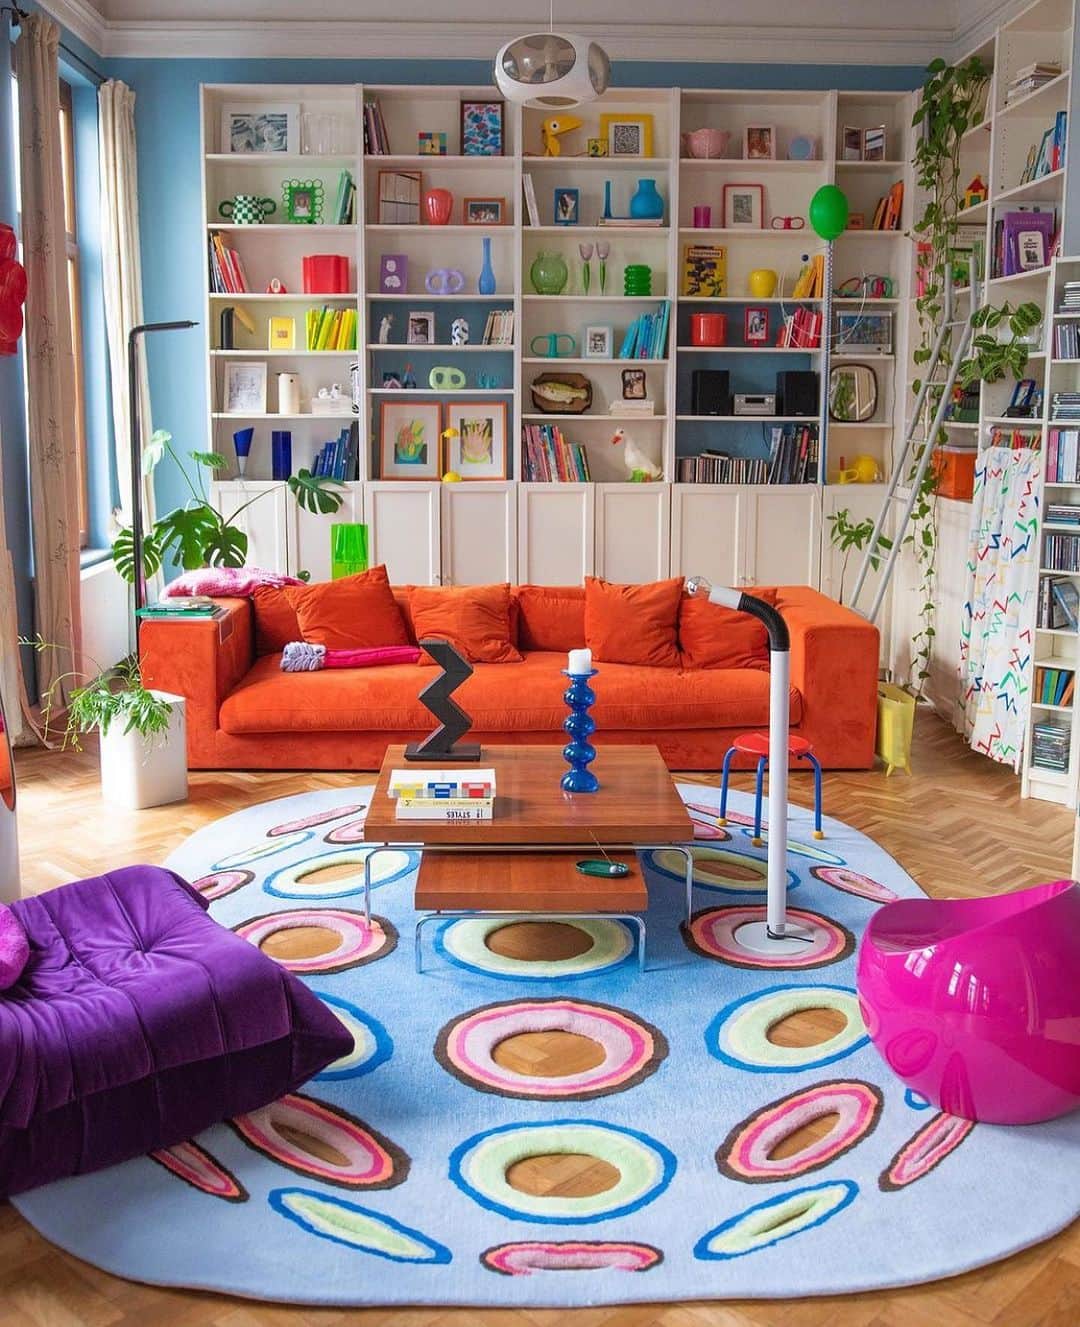 KEISUKE SYODAのインスタグラム：「SPOTTED OUR @studiotheblueboy POP ART DOTS RUG 💚💛🧡💜❤️💙🩵🩷 at theirs beautiful flat in Brussels, Belgium 🇧🇪 @well.homed Perfect decoration that I’m obsessed with 😍🍄」